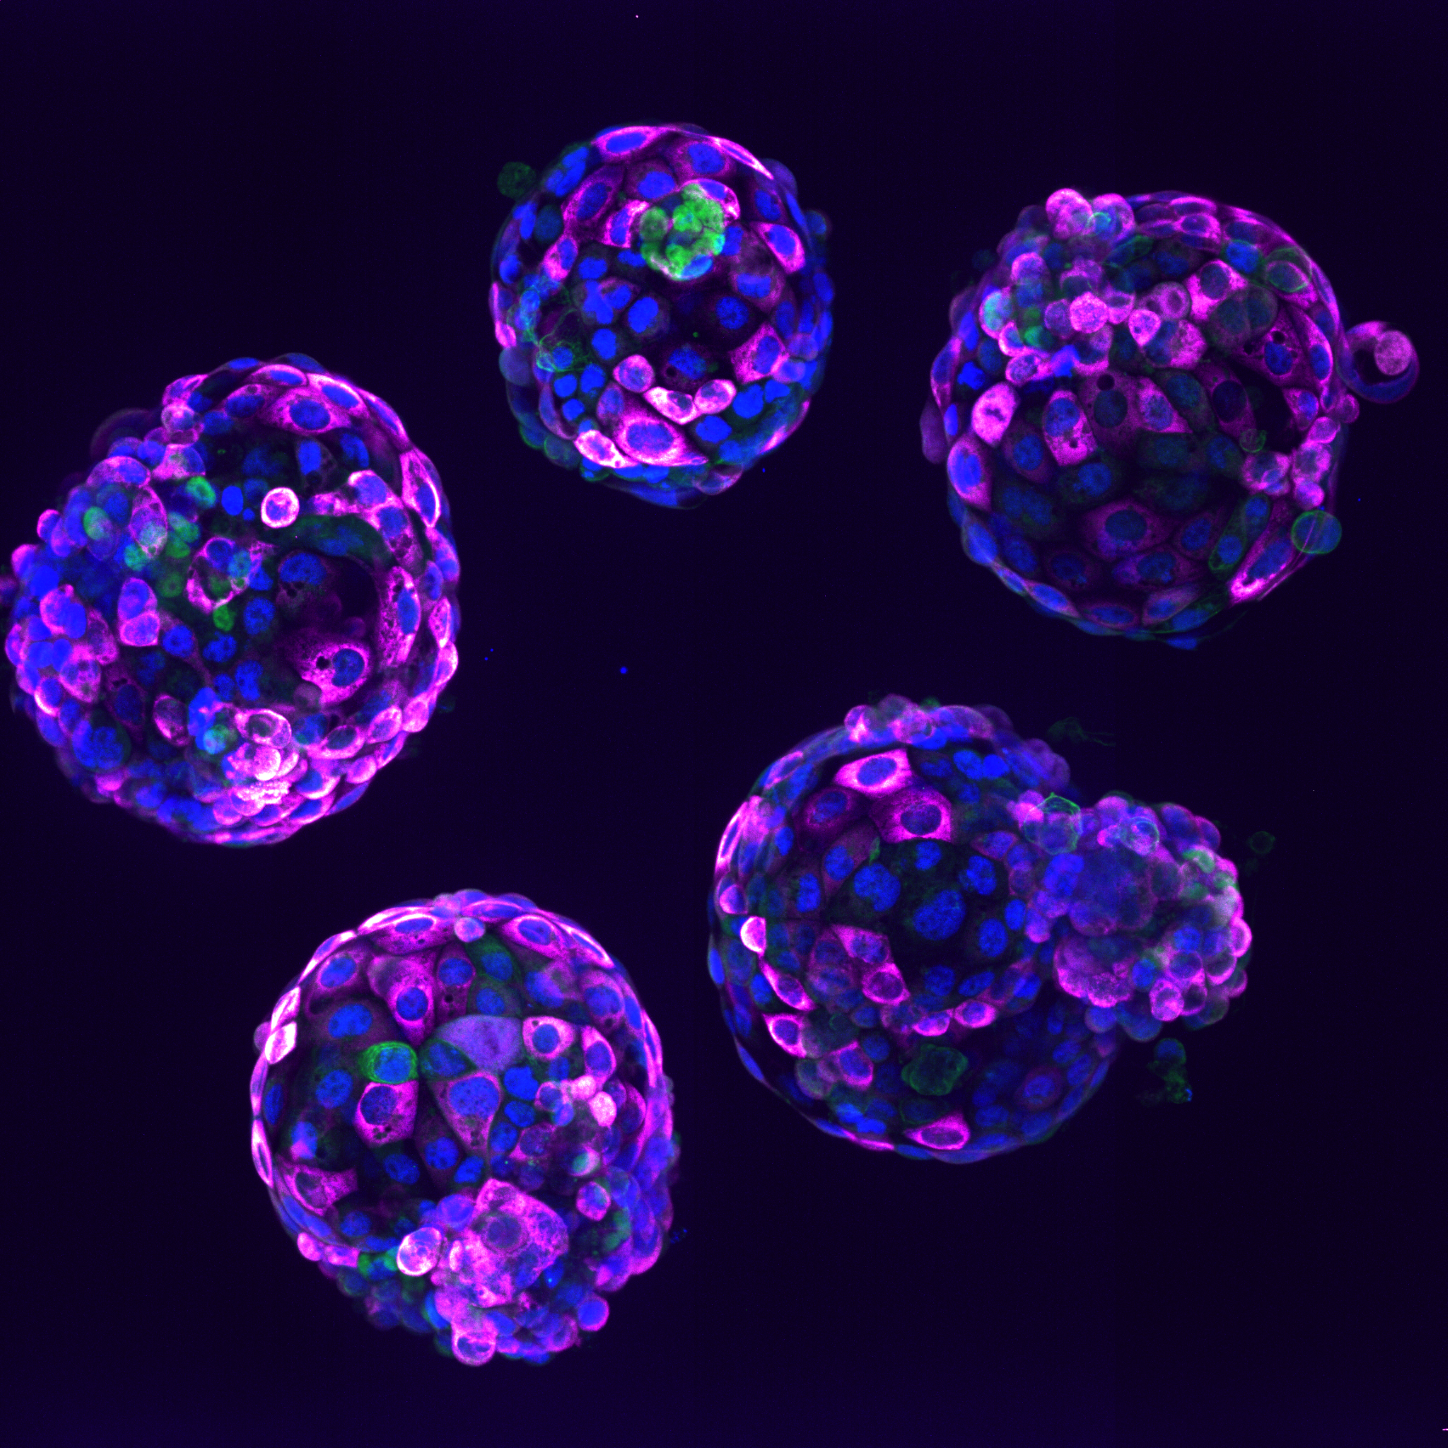 Human embryo-like structures derived from human embryonic stem cells (blastoid) that form balls of cells with an inside cavity that look very much like blackberries. 